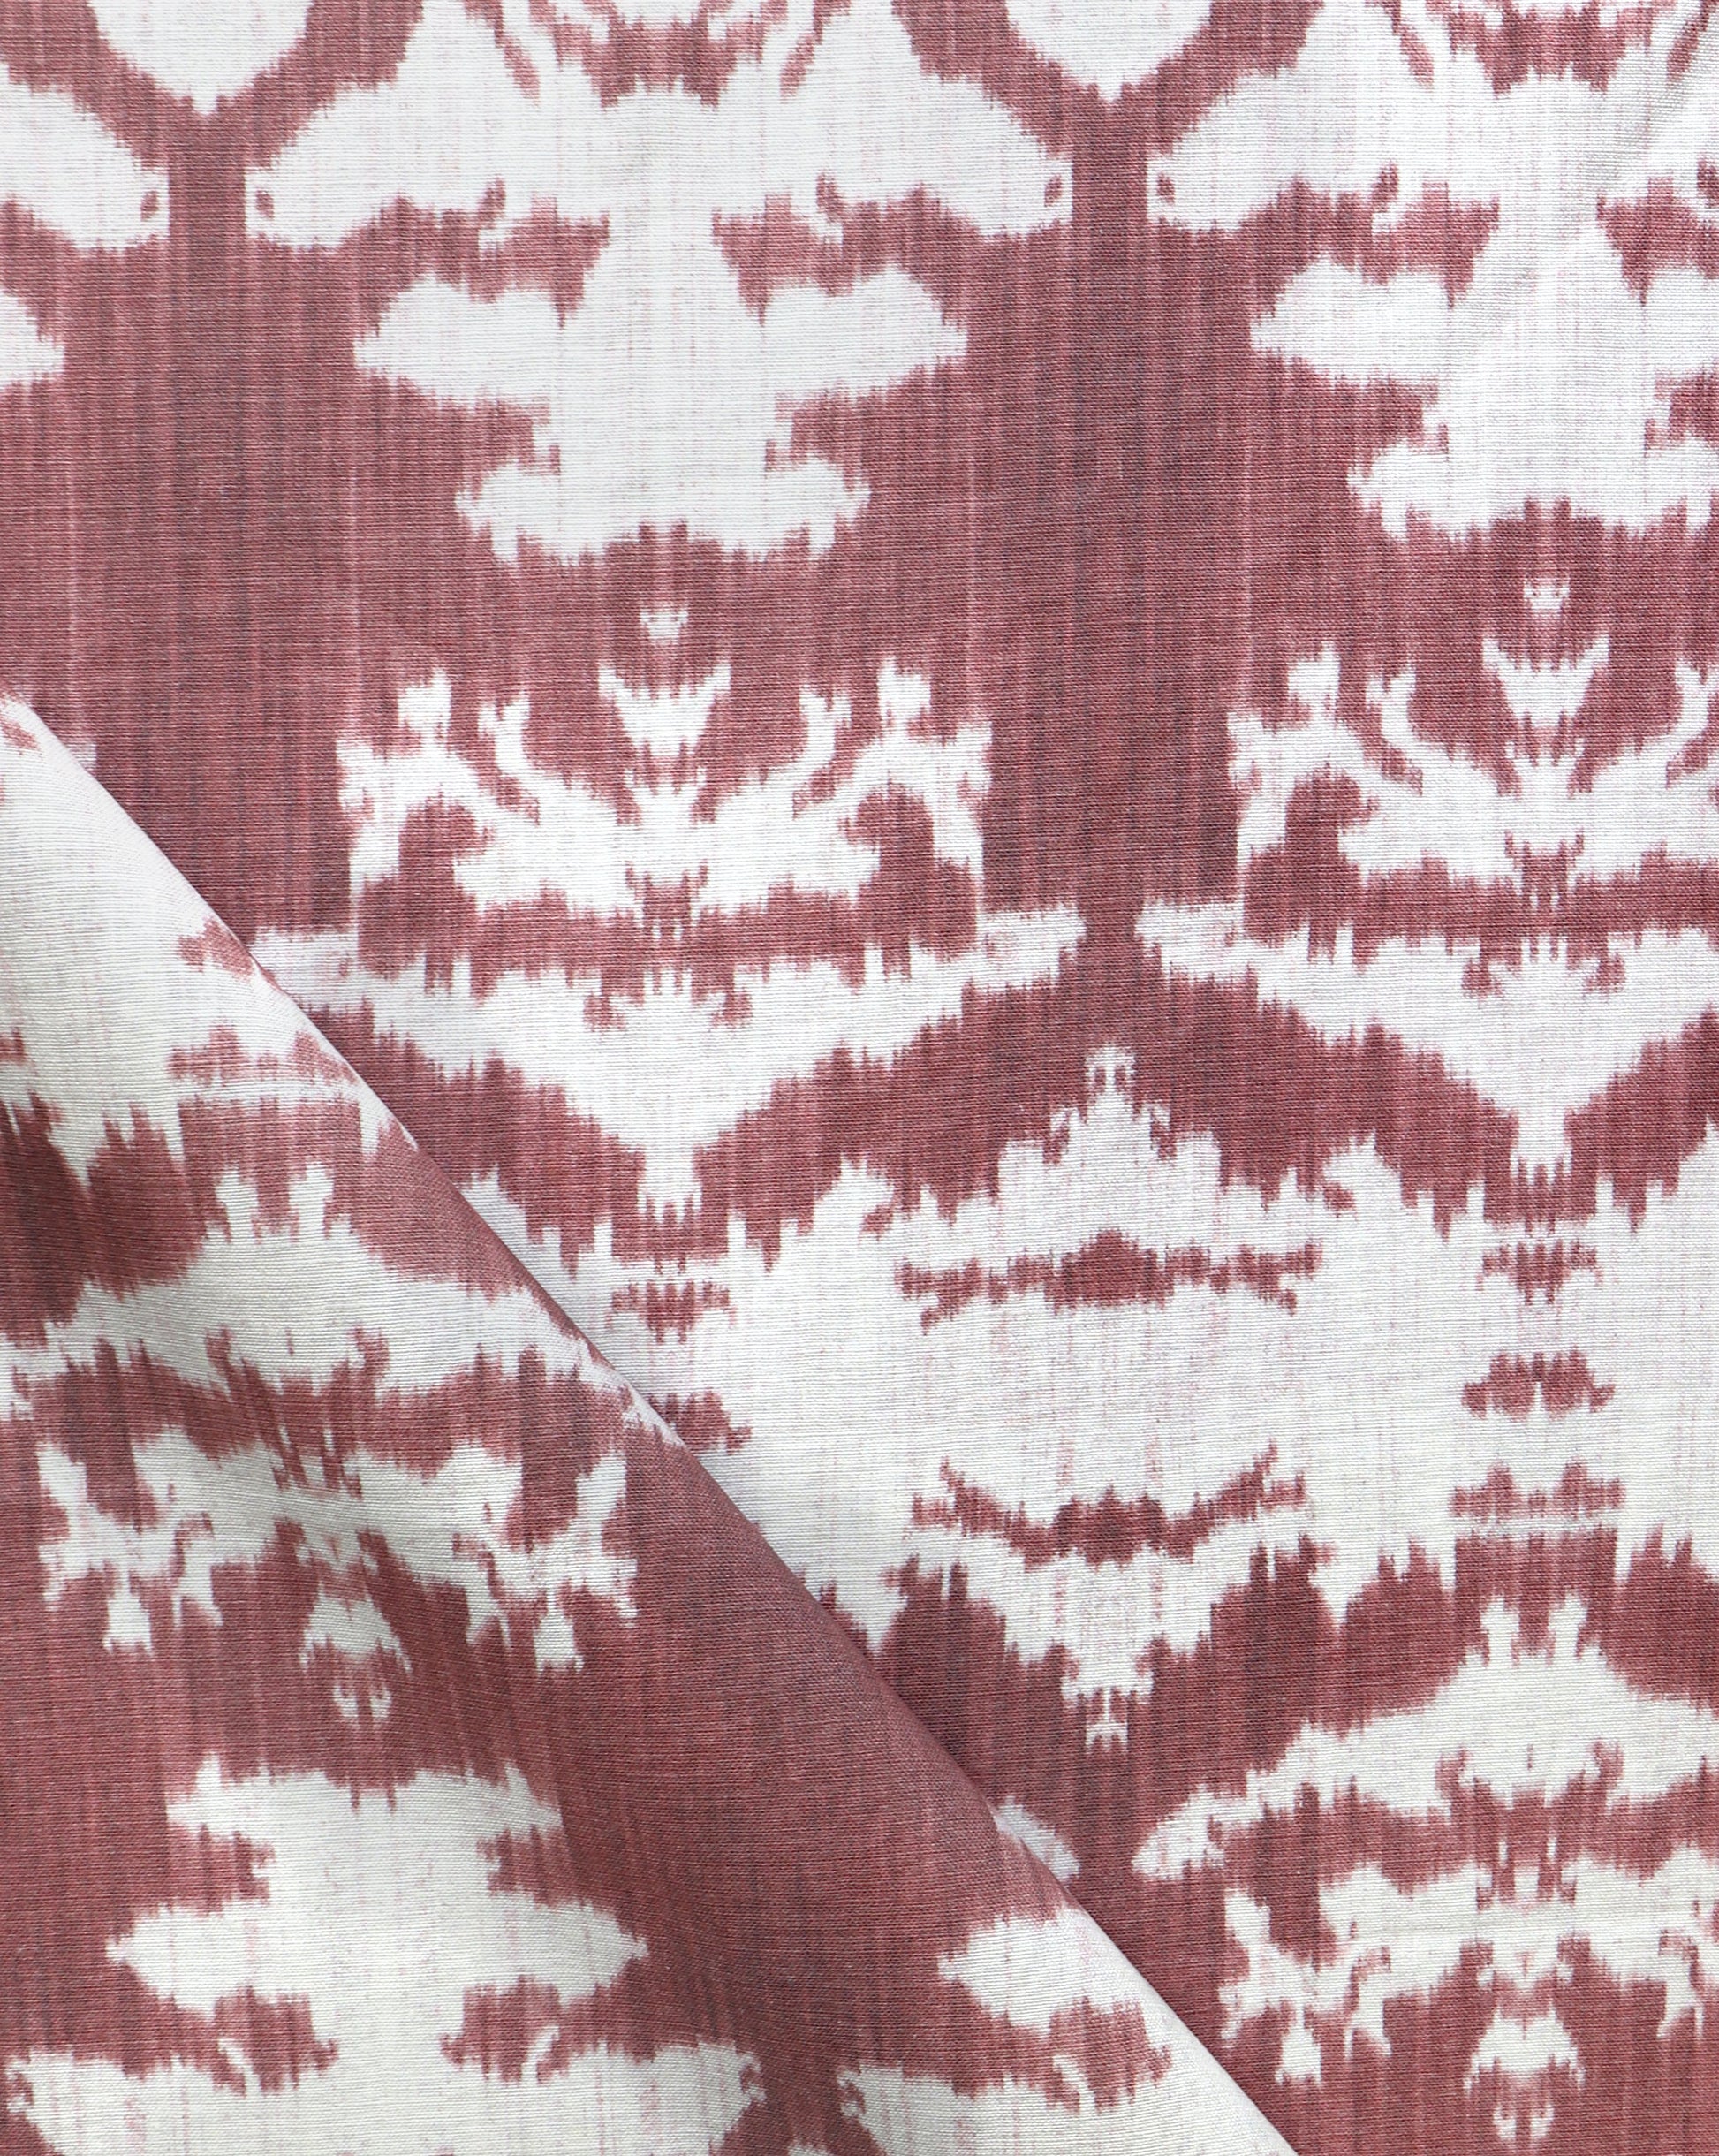 A close up of a red and white The Dance Fabric from the Lora Collection